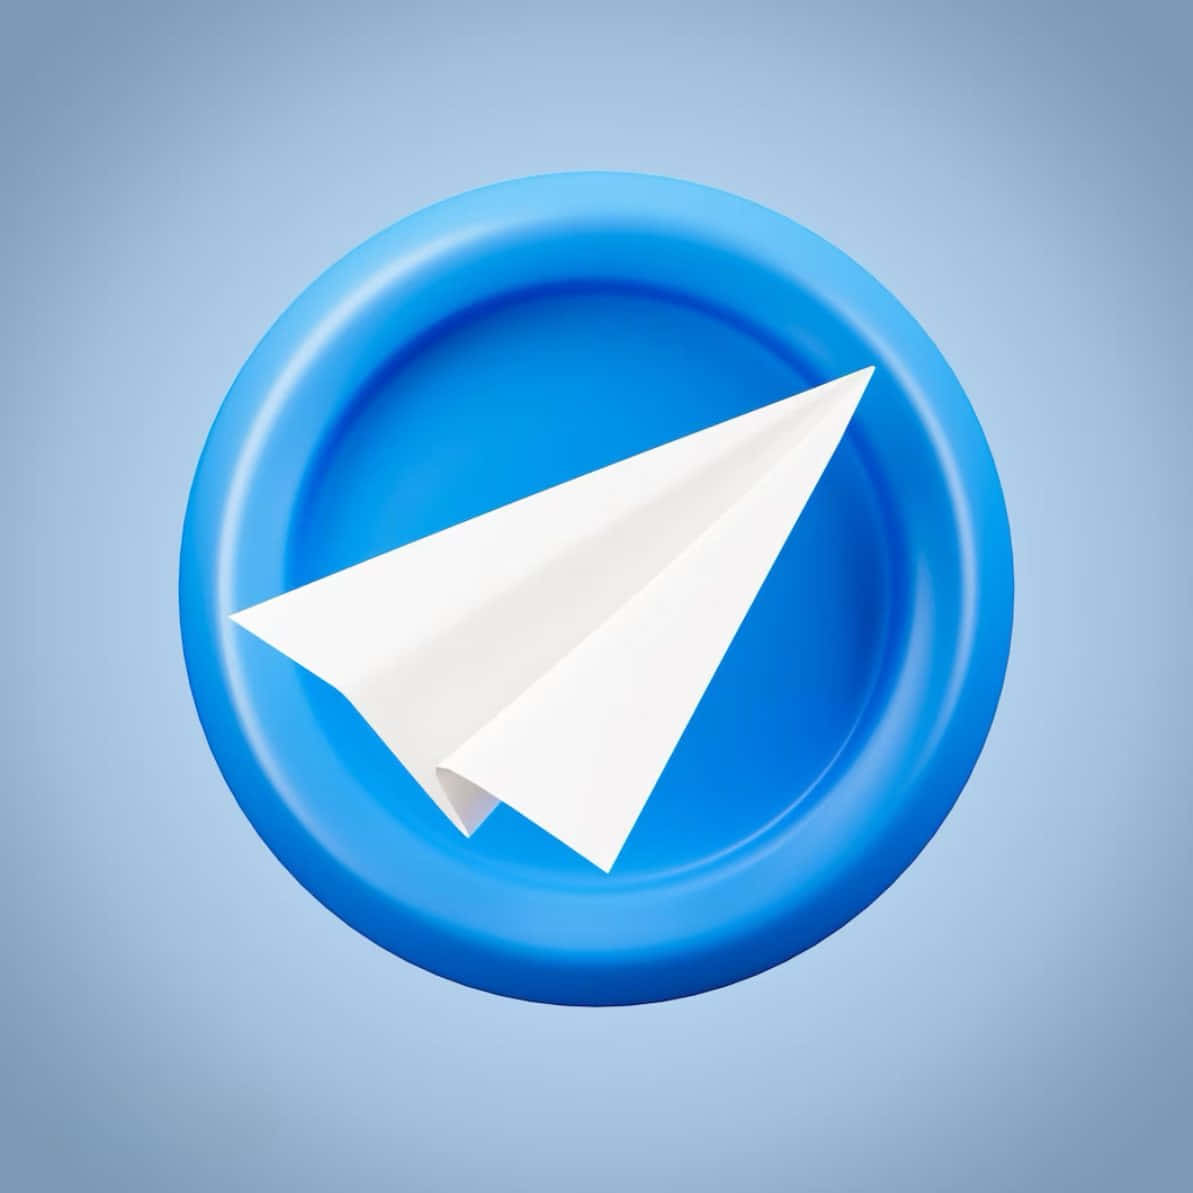 A Blue Button With A Paper Airplane On It